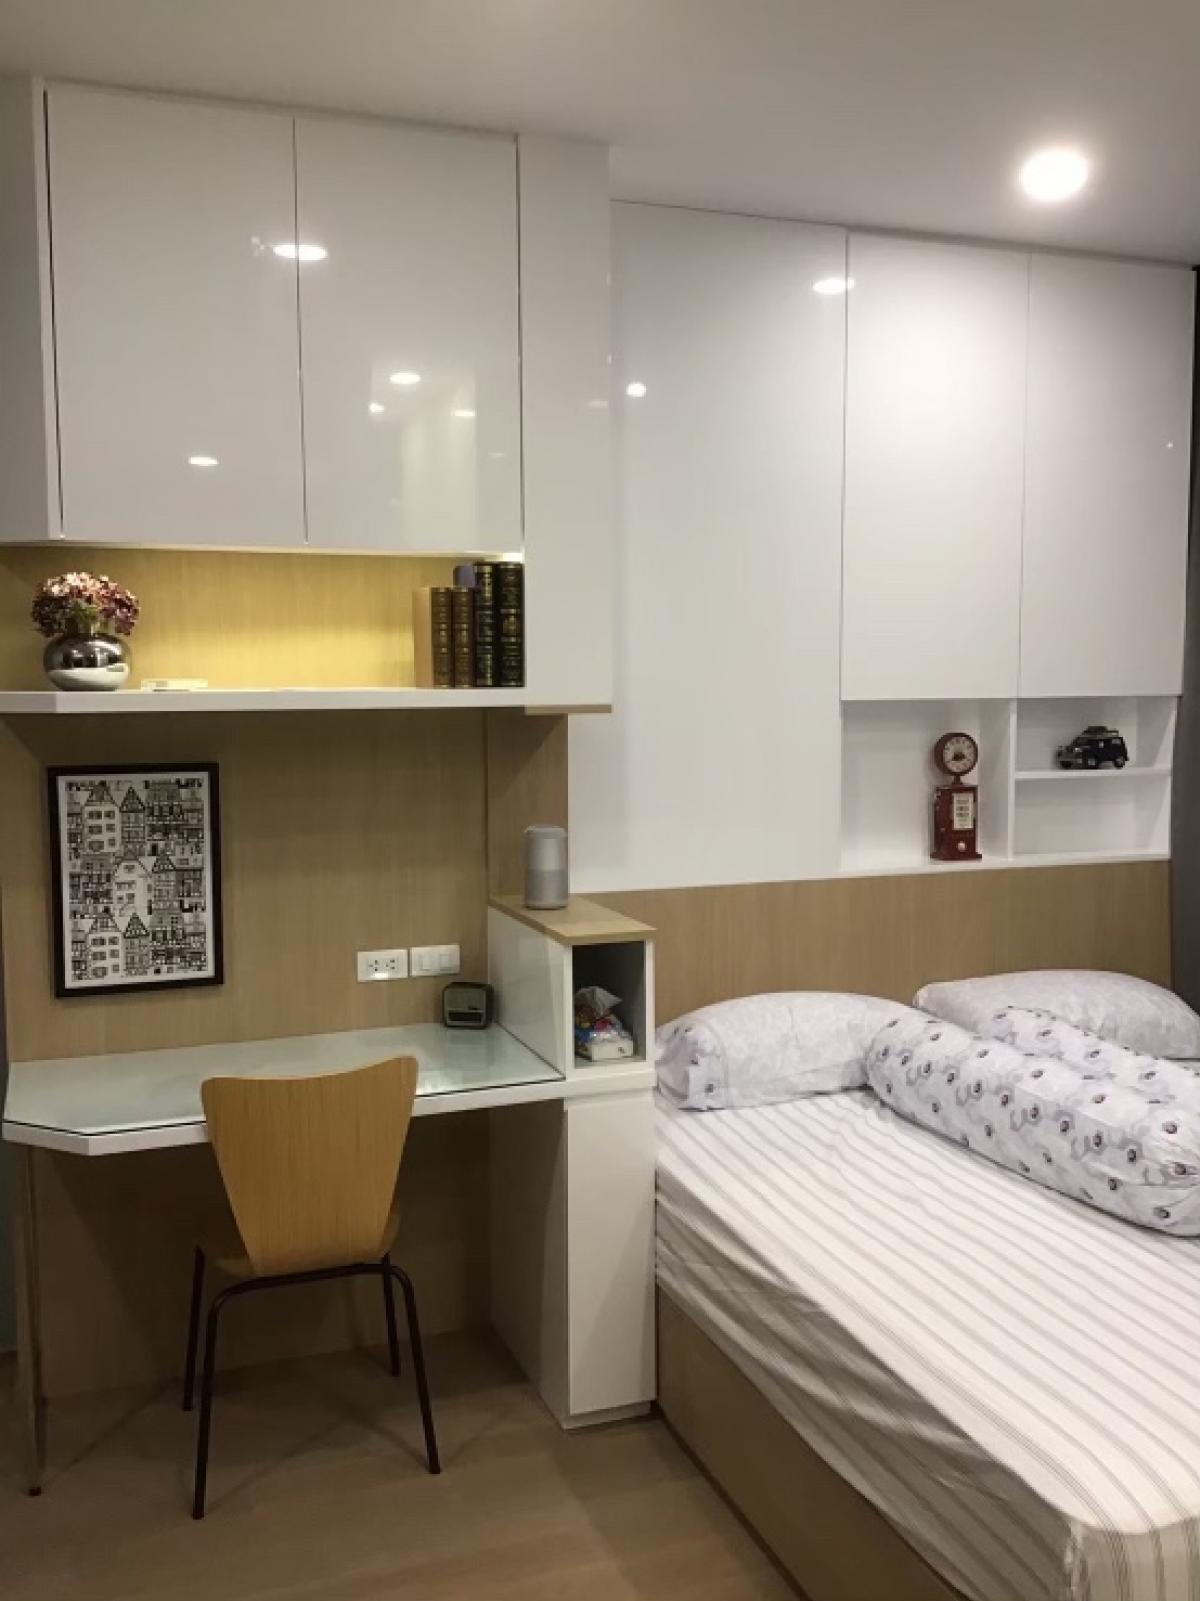 For RentCondoSiam Paragon ,Chulalongkorn,Samyan : For rent, beautiful room, Ashton Chula/Silom, studio size, sq m 25, floor 40, view, Chula Icon Siam, rental price 21,000 baht/month, fully furnished, built-in room, all gone, hurry up, good room, if interested, contact 0626562896 Ray ashton chula-silom